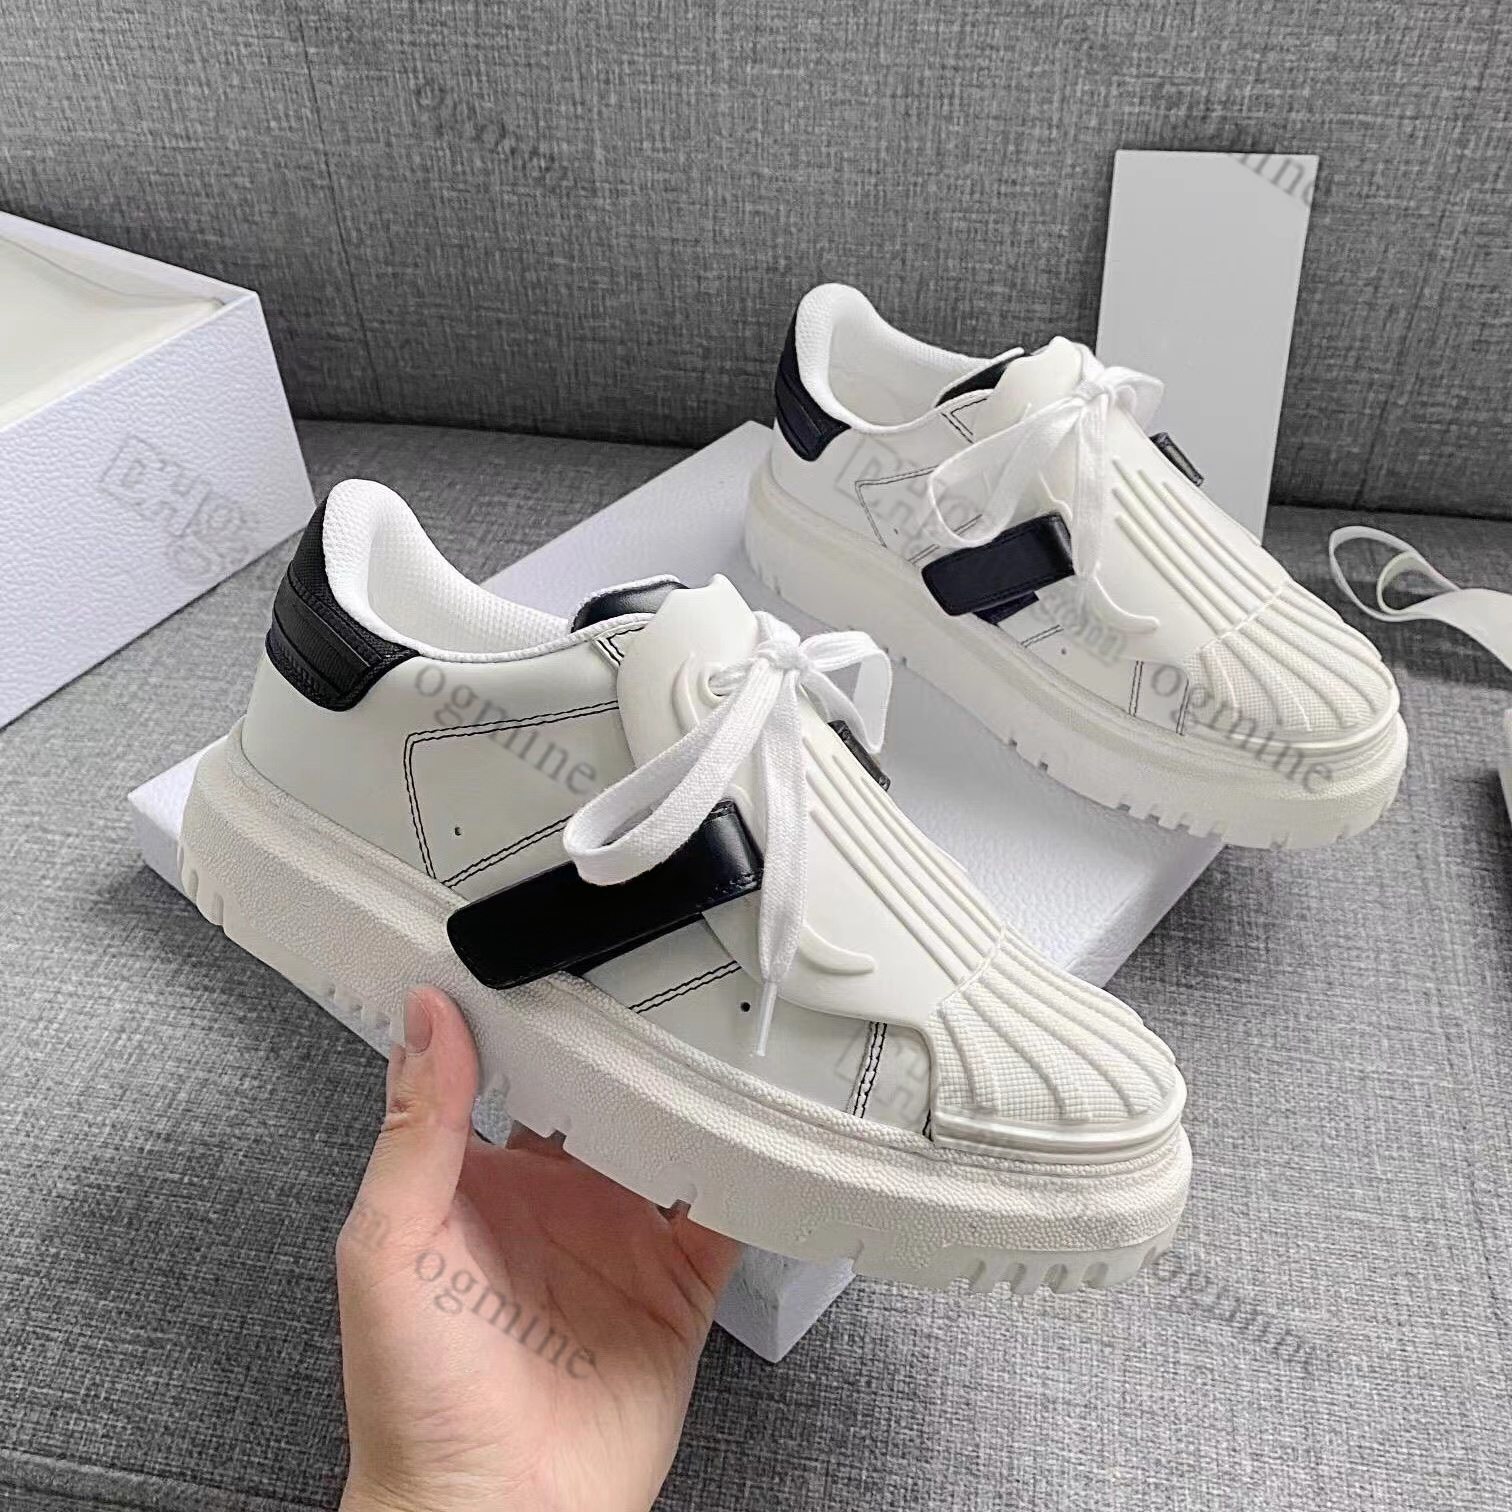 

Designer woman Fashion Casual Shoes D-ID SNEAKER White Calfskin and Rubber Womens Hommes DlOR-ID platform Lace-up Adhesive Convenient buckle Tongue Sneakers 35-40, Hello